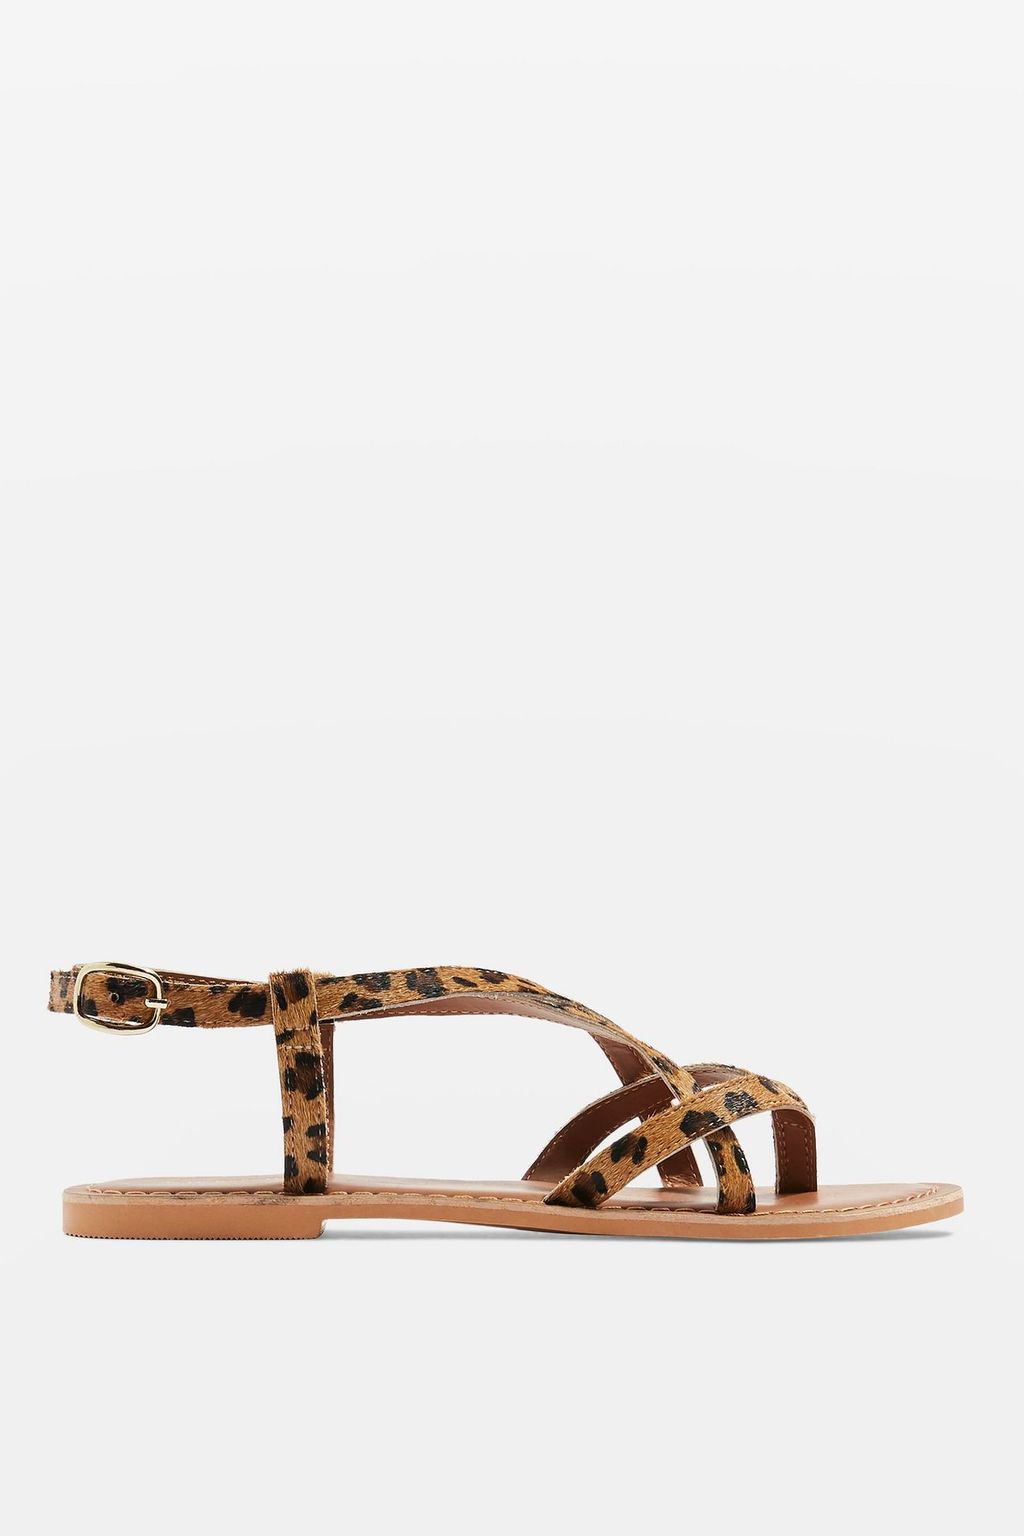 Affordable (and expensive-looking) leopard print sandals | Woman & Home